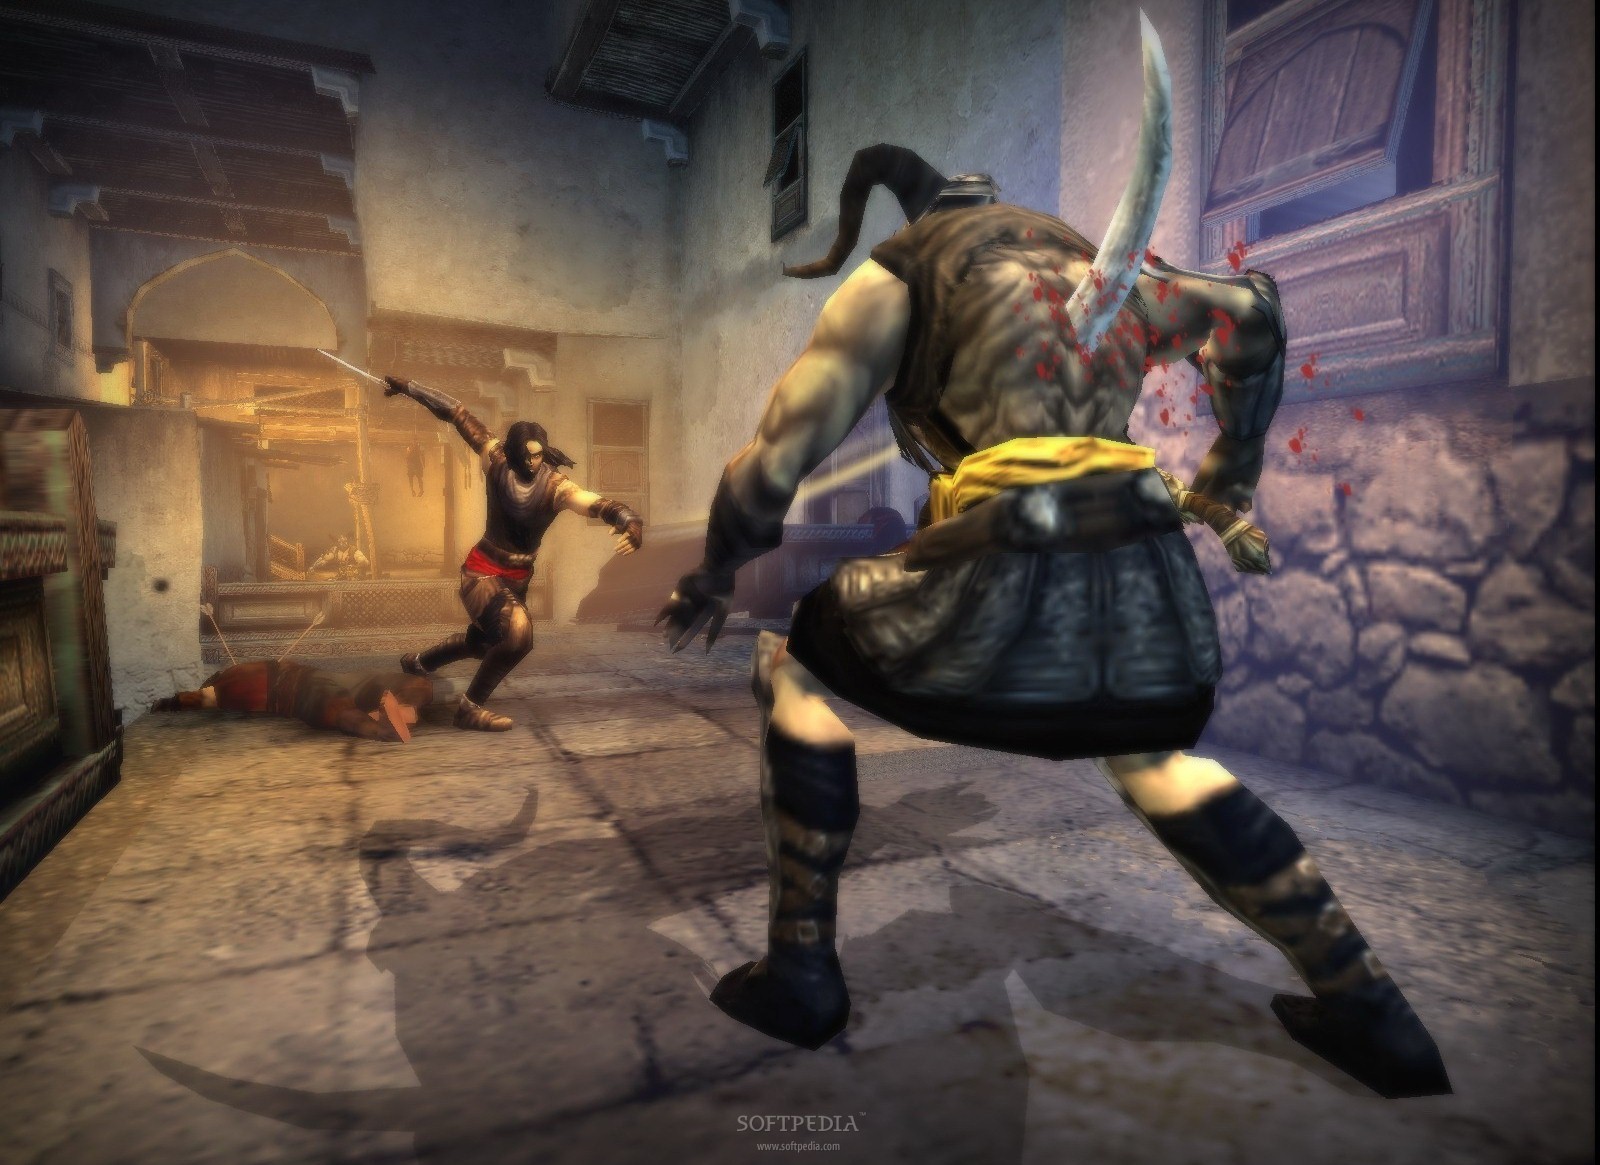 Panels and Pixels: VG REVIEW: Prince of Persia: The Two Thrones